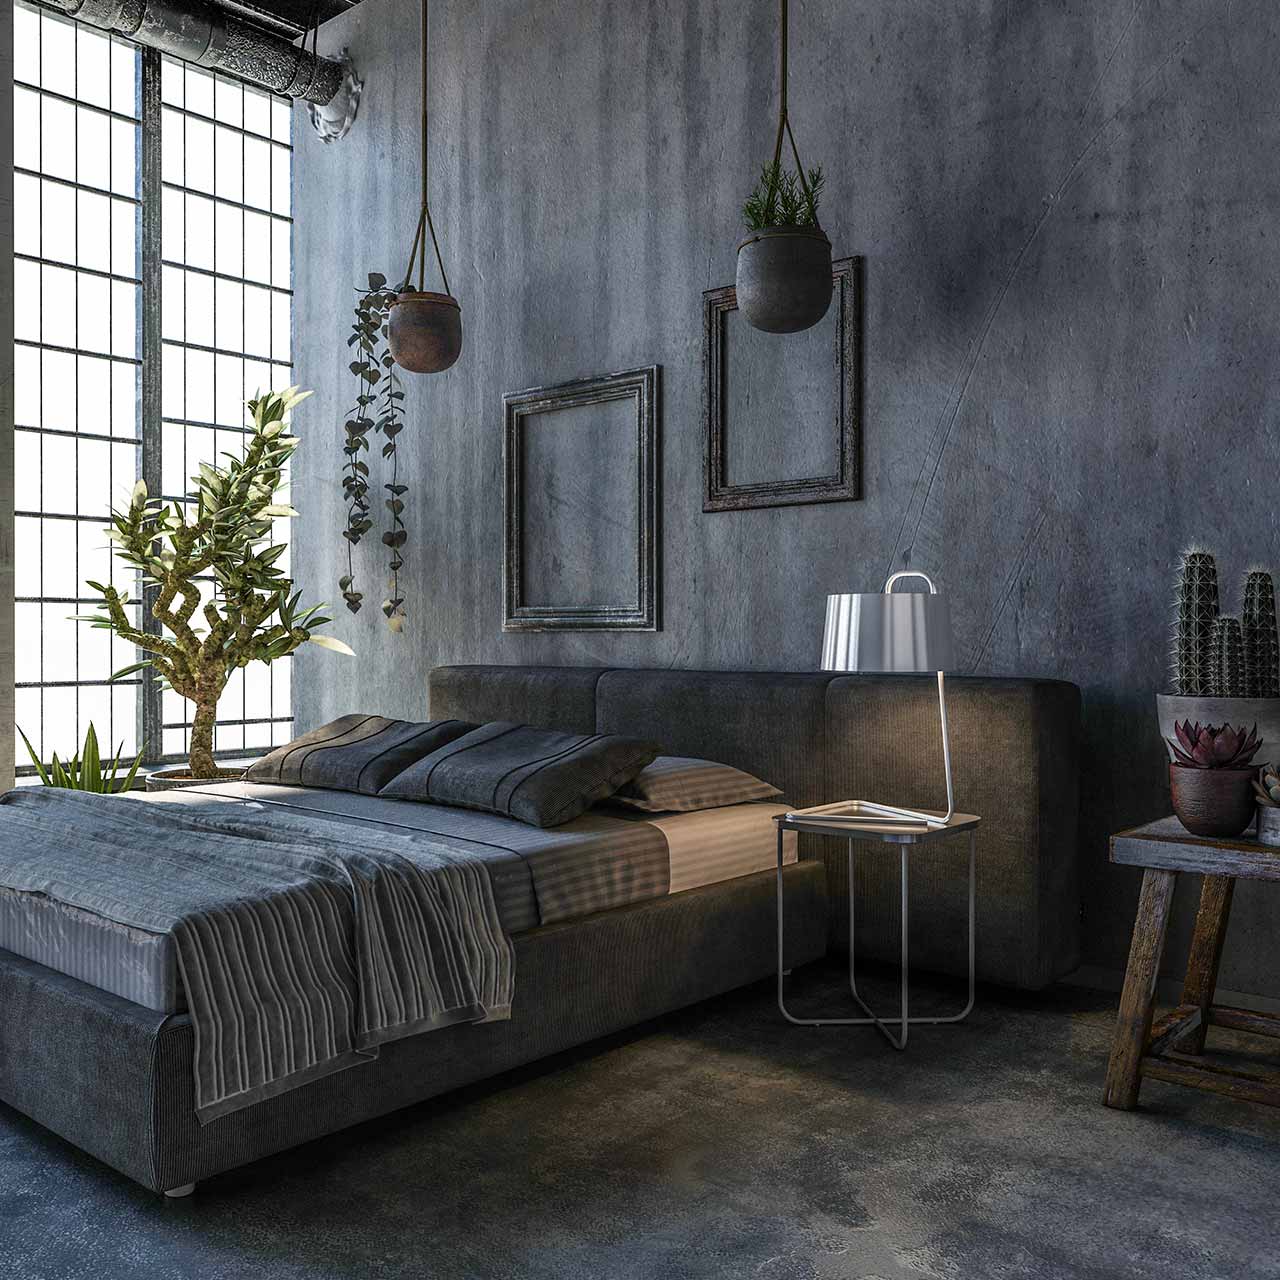 Industrial style